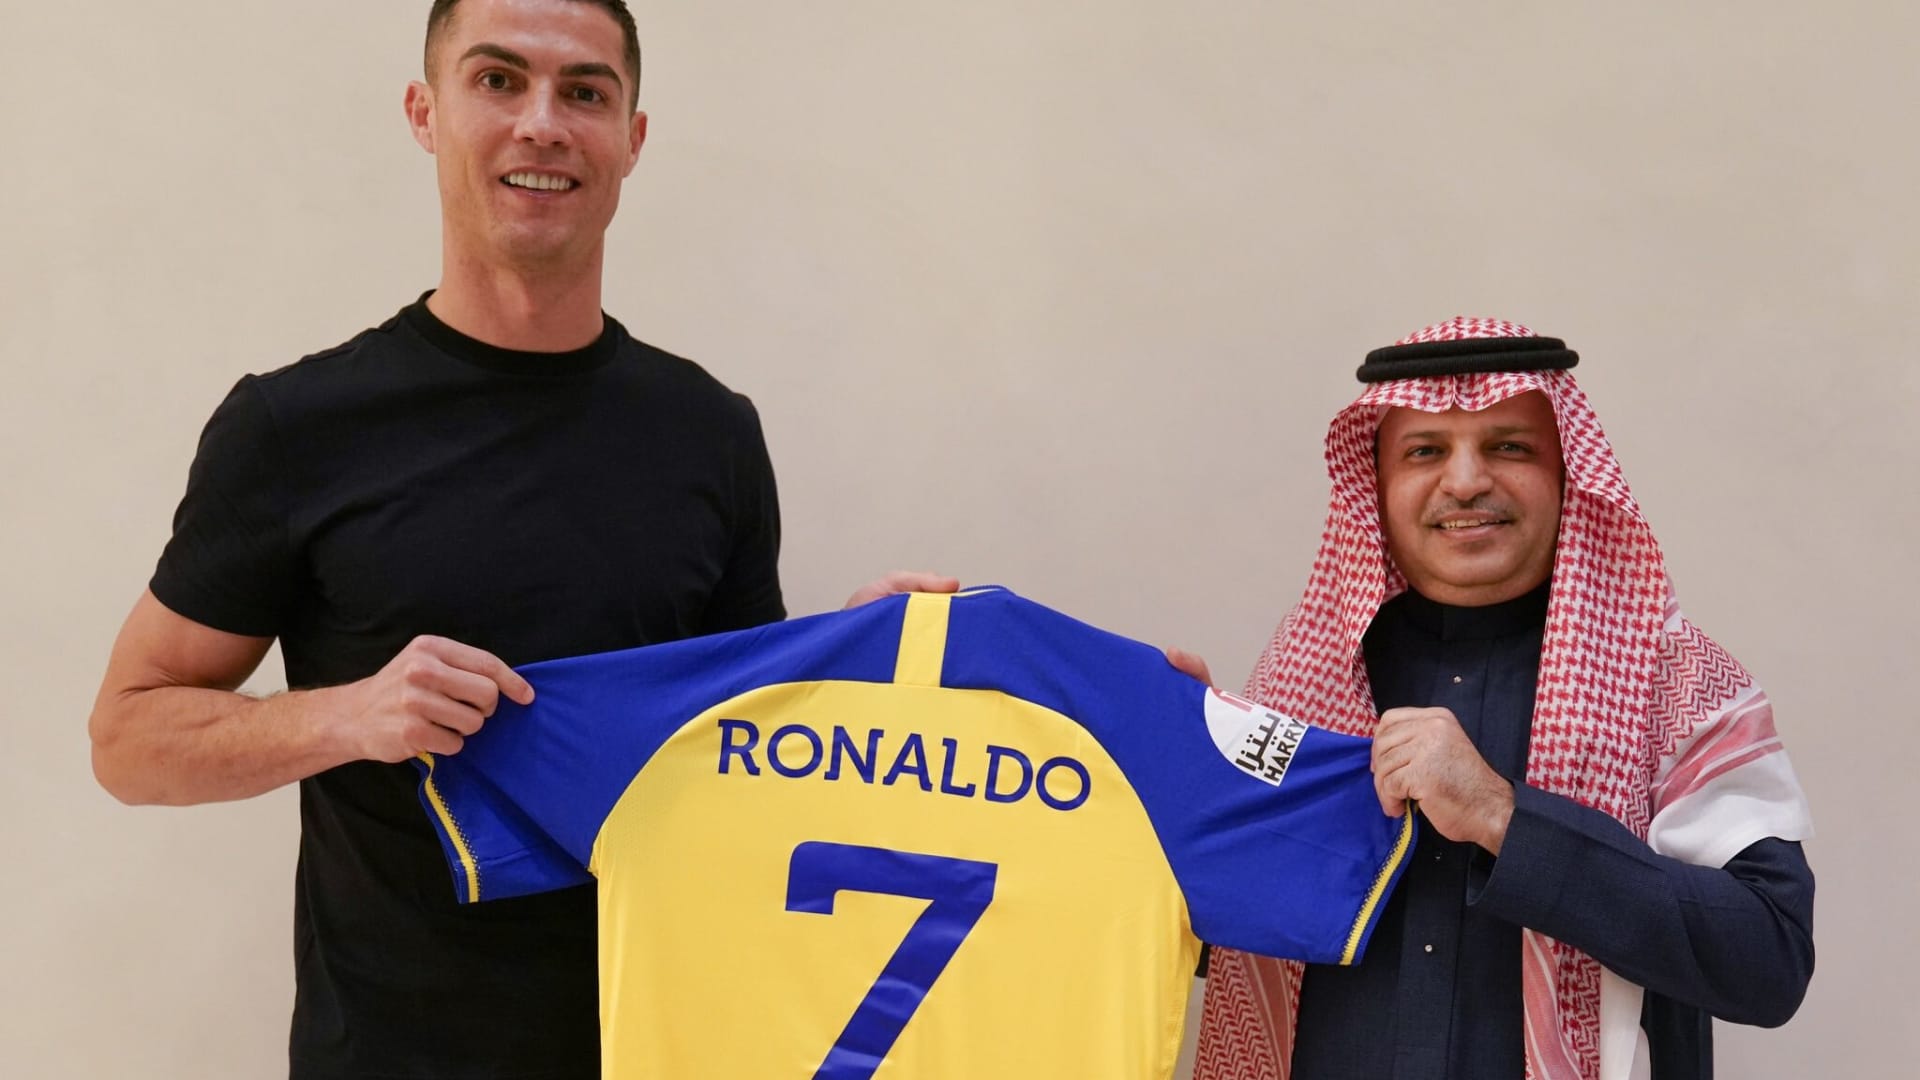 Saudi Arabia’s love for soccer could cause ripple effects